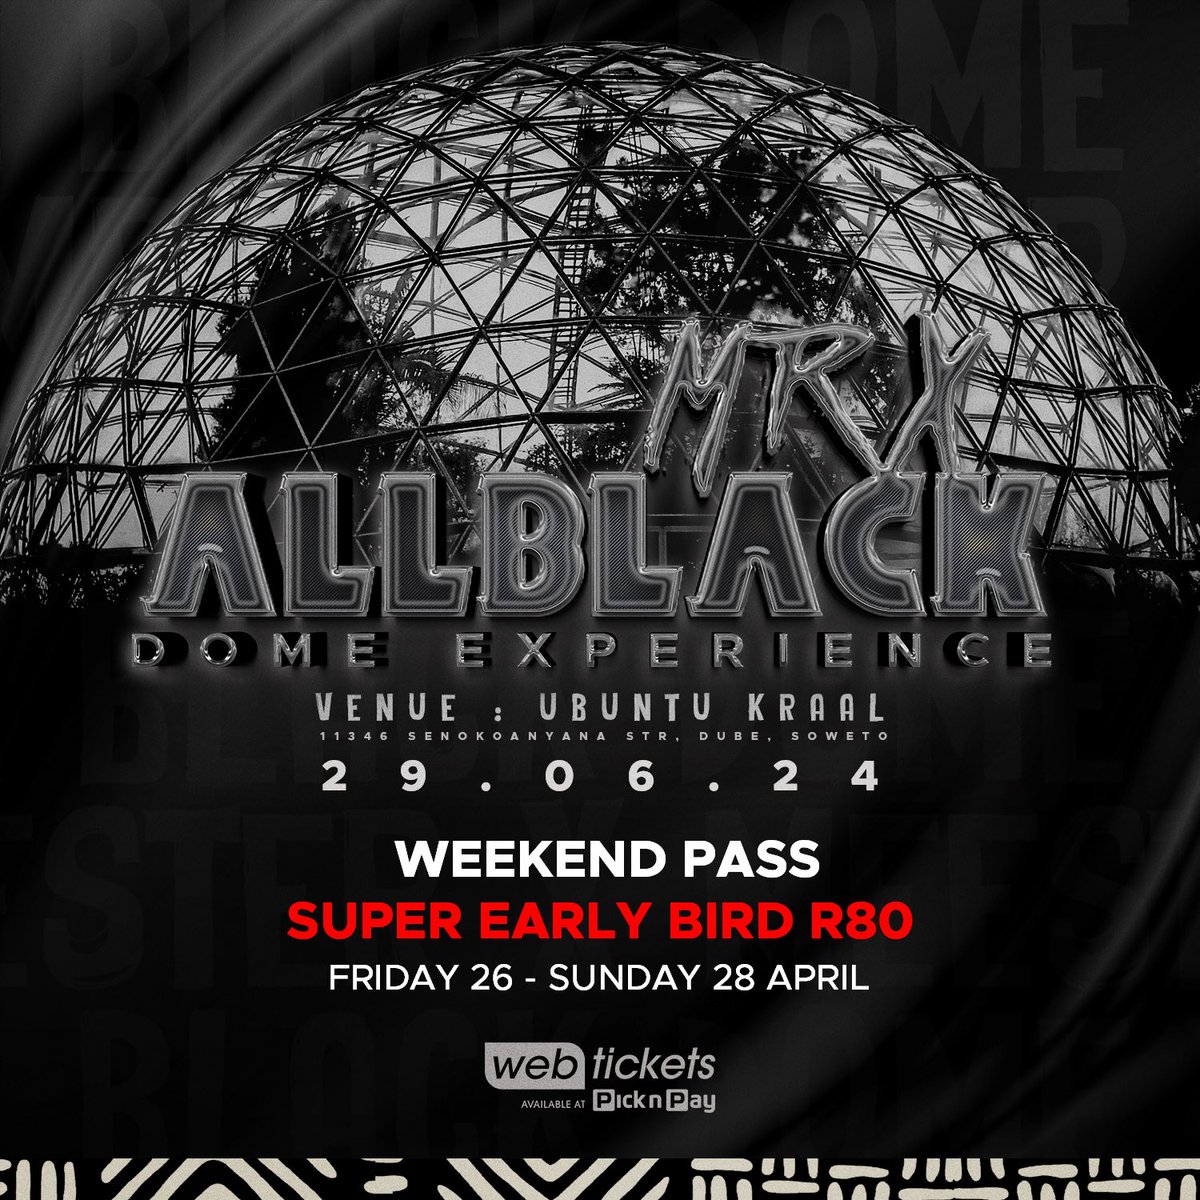 Get your ticket for R80.00, only from now until Sunday the 28th of April. Web tickets is your best bet: webtickets.co.za/v2/event.aspx?…, the line-up is dropping soon. Every genre’s causing havoc here, this is one musical experience you don’t wanna miss. #MrXAllBlackDomeExperience